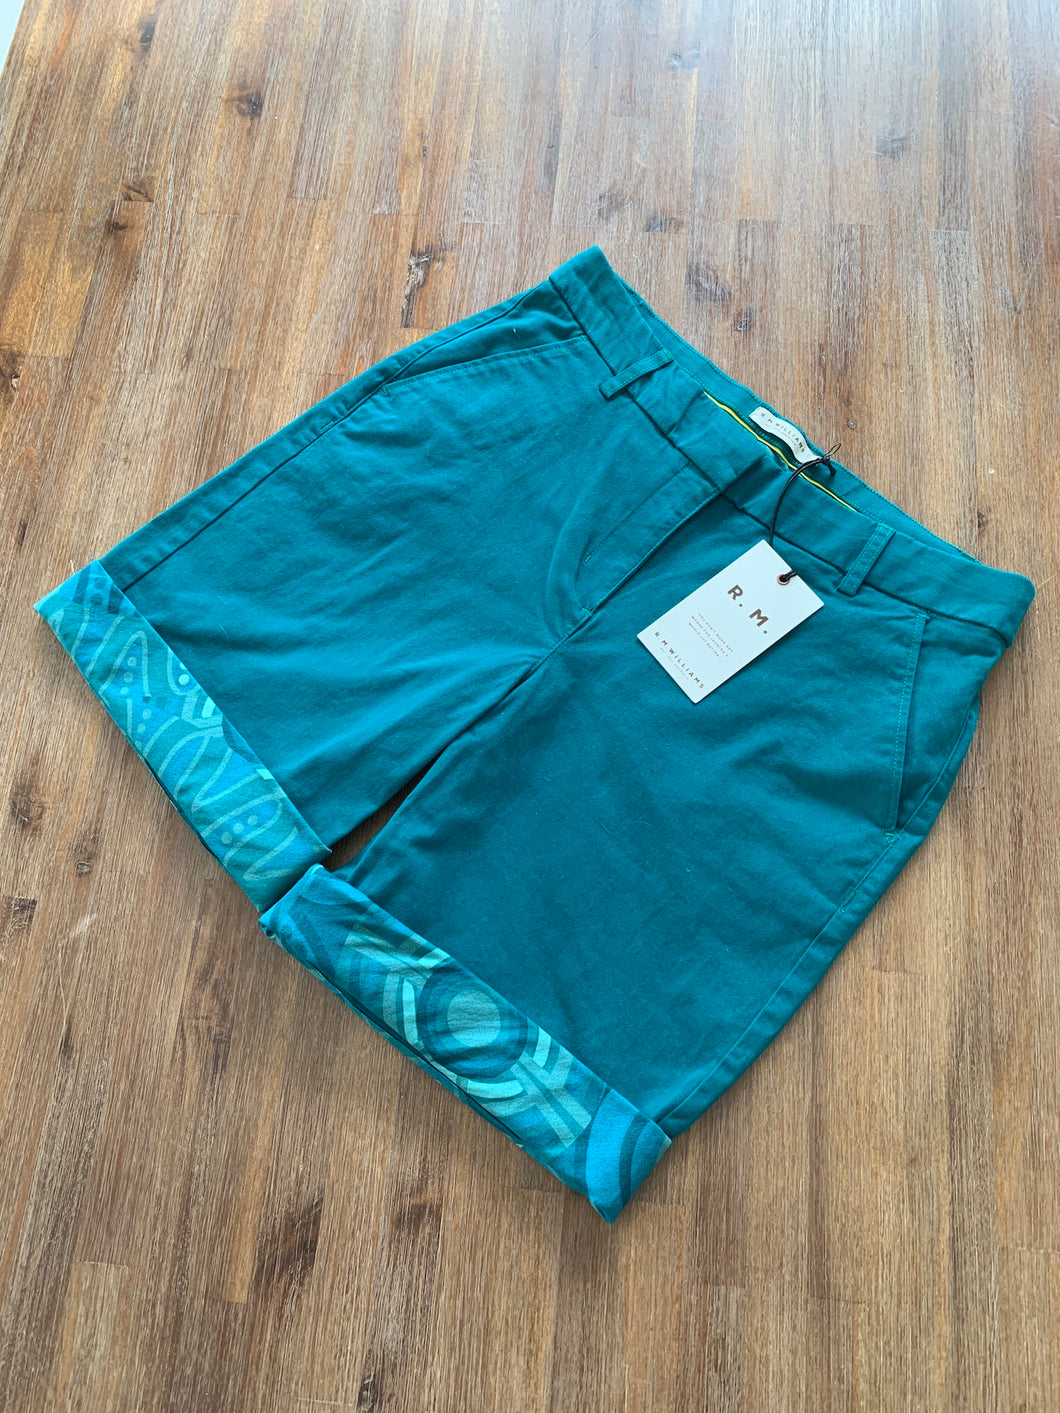 R.M WILLIAMS Size 8 2018 Commonwealth Games Shorts in Green NEW Women's OCT135